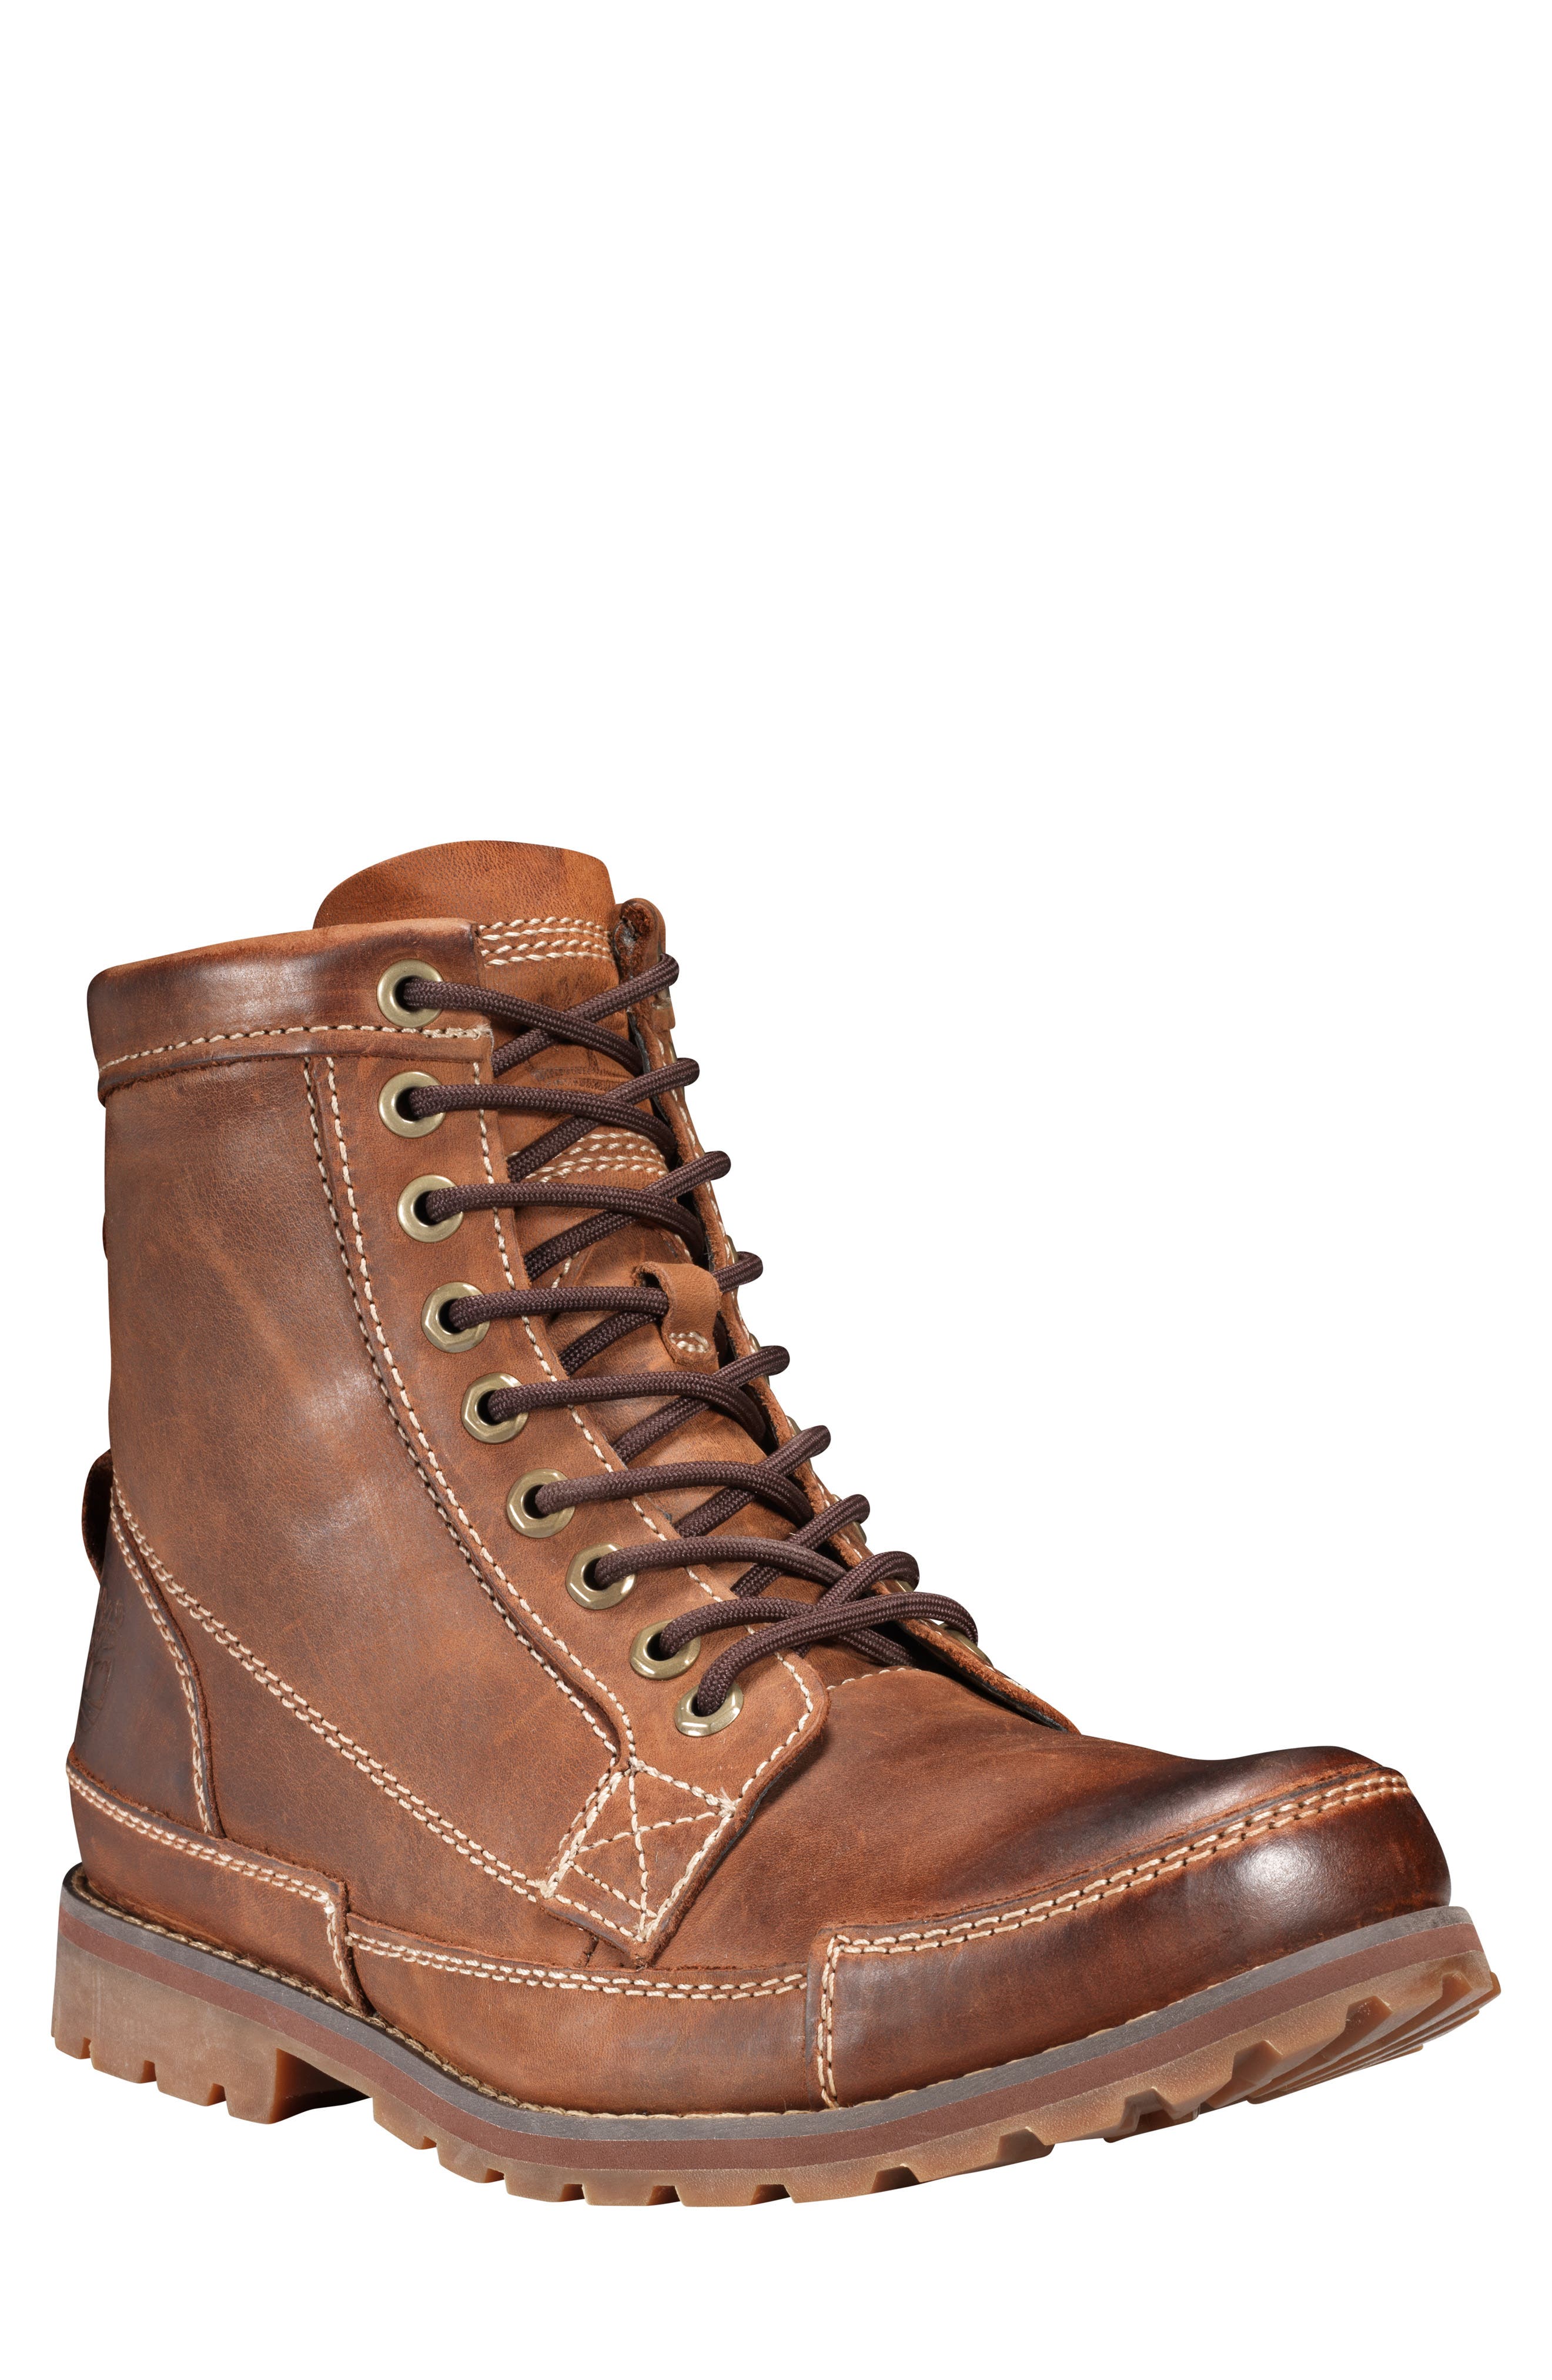 rugged casual boots